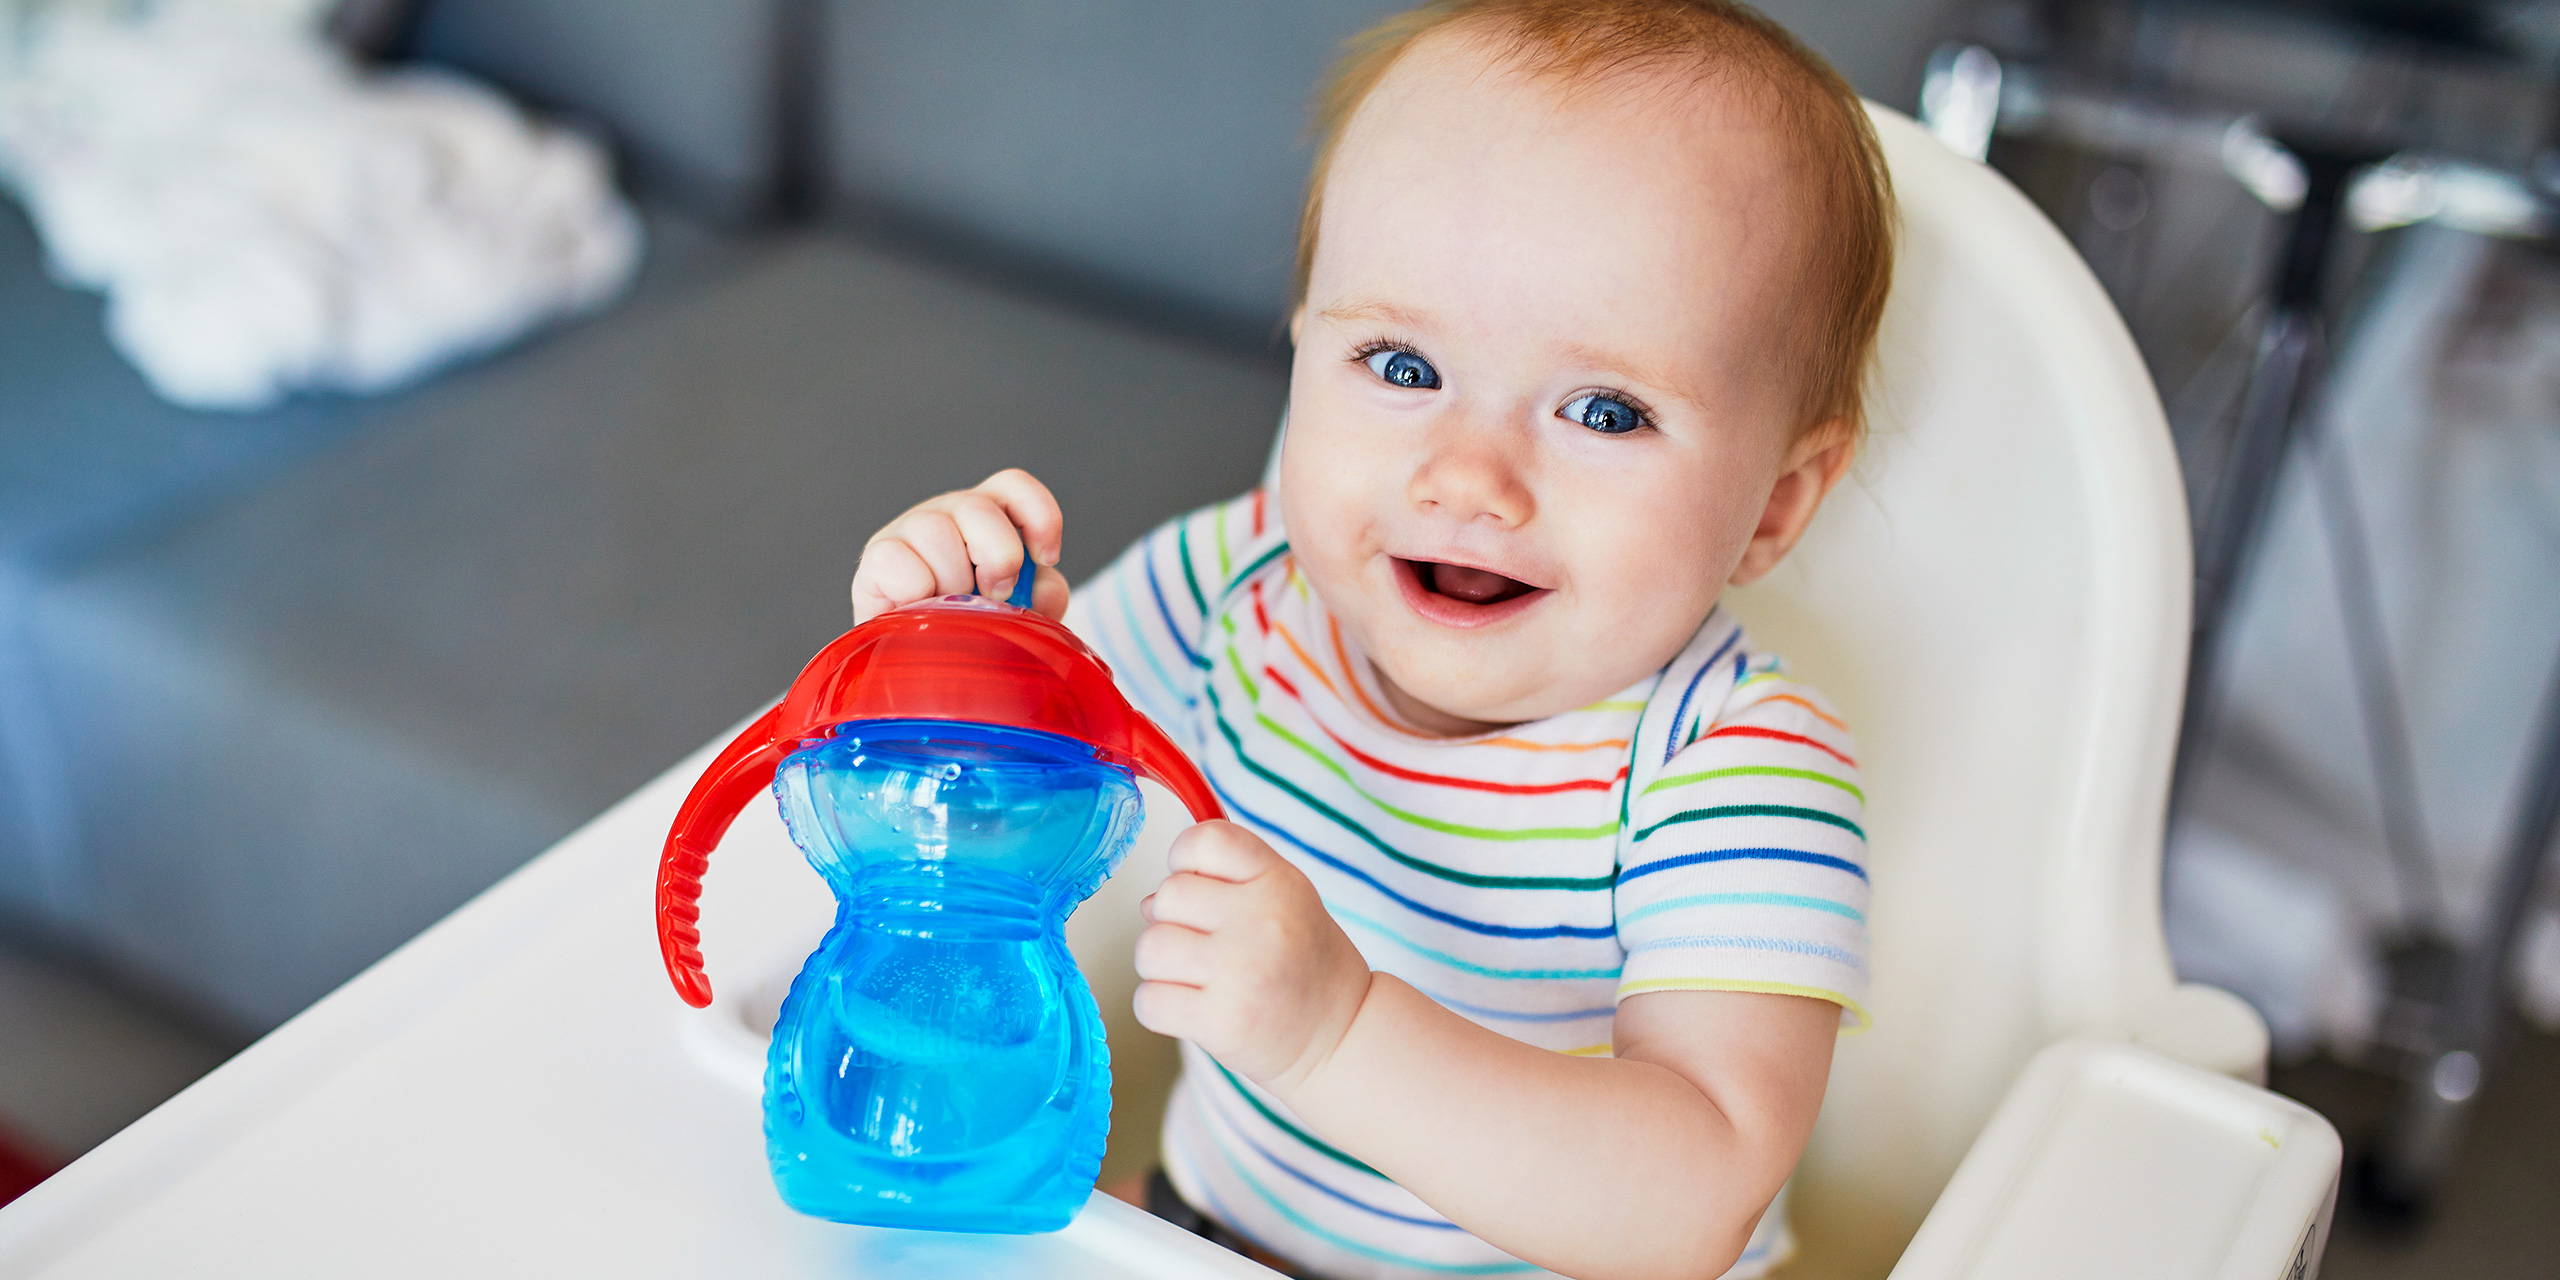 Little baby girl sitting in high chair at home or at restaurant and drinking water from sippy cup; Courtesy Ekaterina Pokrovsky/Shutterstock